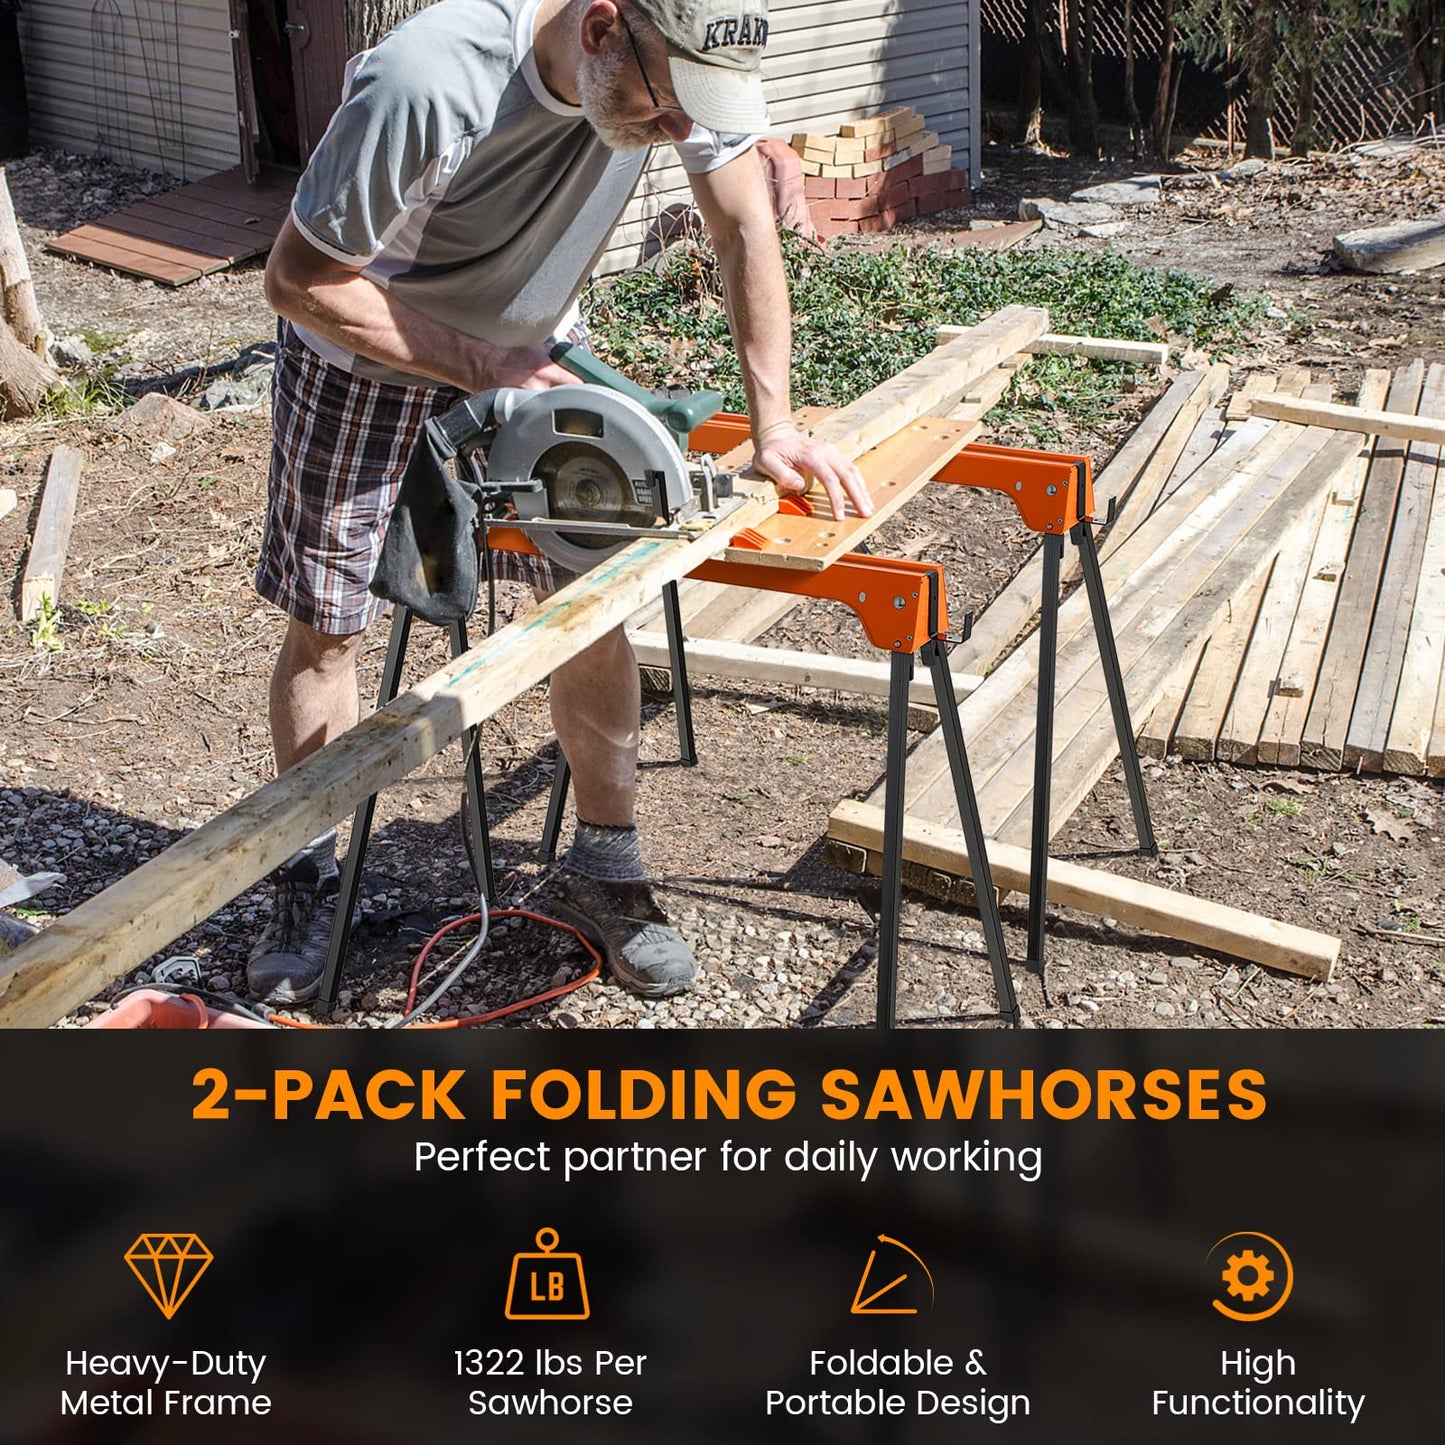 S AFSTAR Safstar Saw Horses 2 Pack Folding, Lightweight & Portable Speedhorse Twin Pack with Convenient Handle, Each Supports up to 1322 lbs, 2 Pack